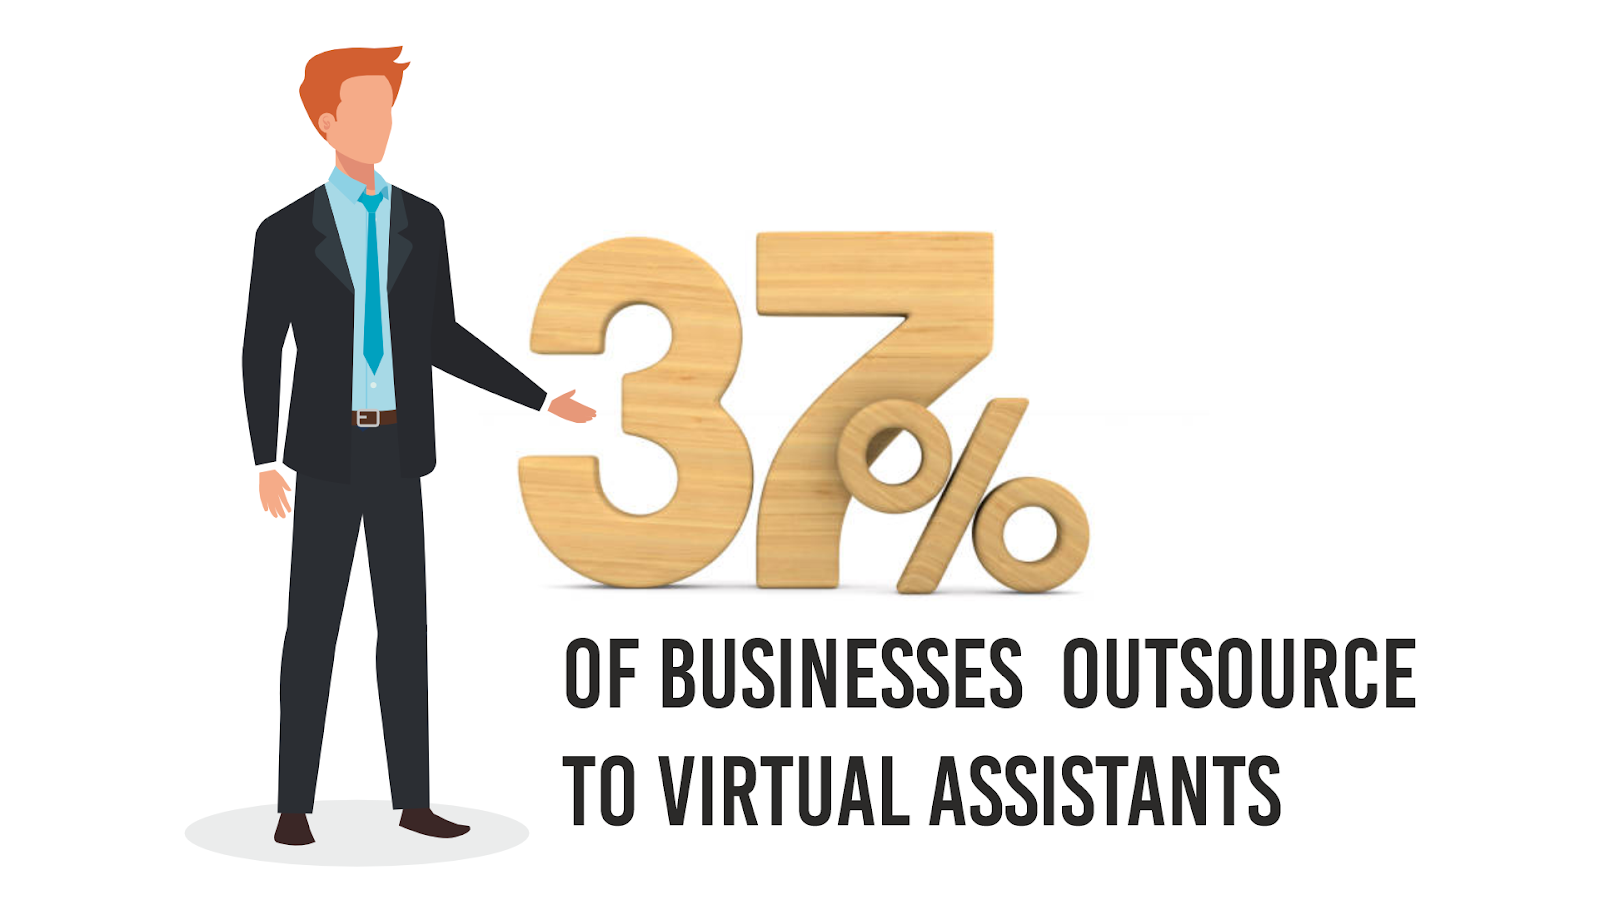 Infographic showing percentage of businesses that outsource work to virtual assistants